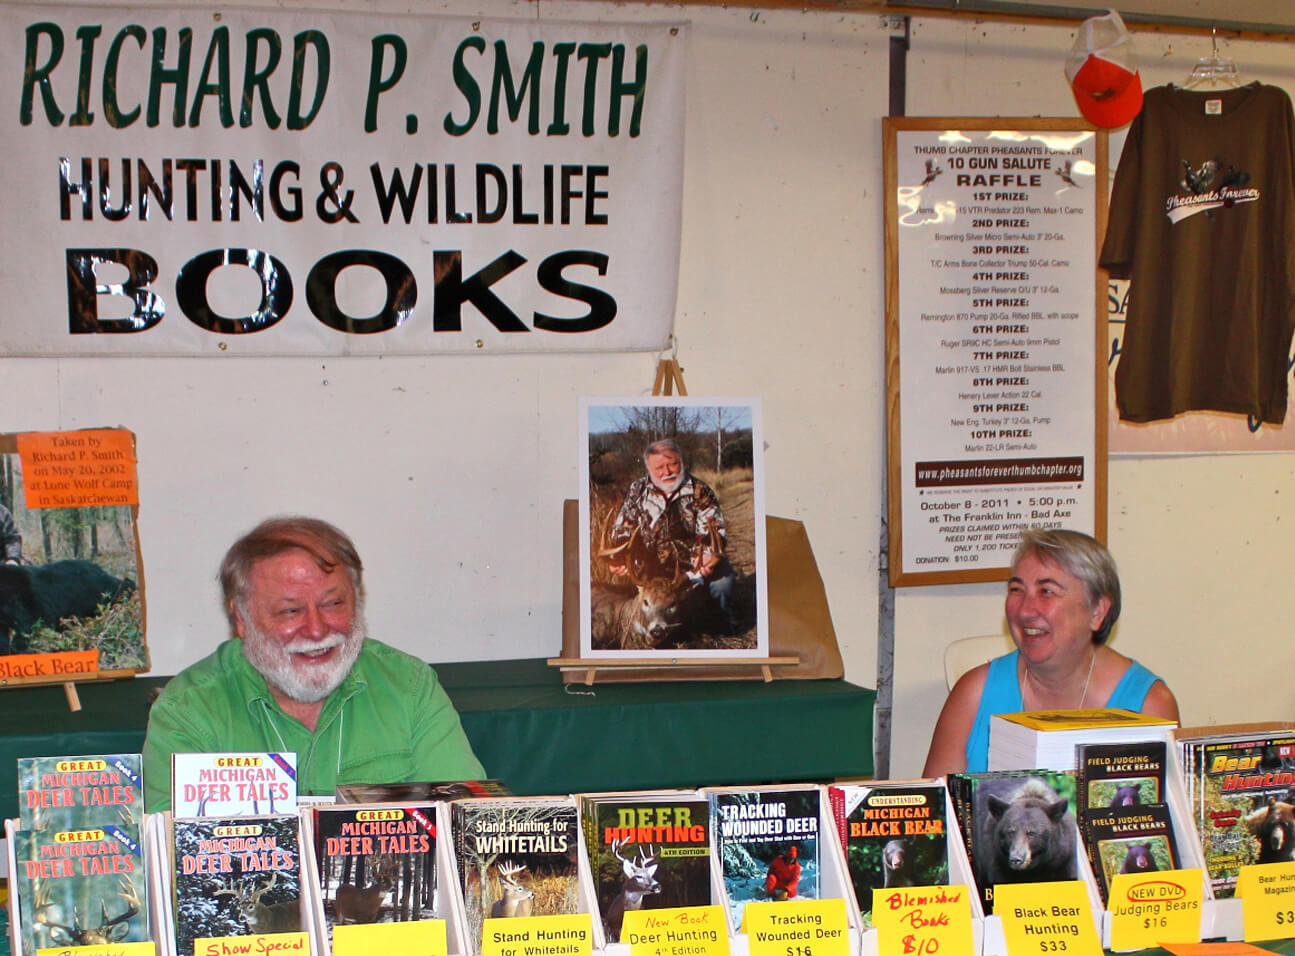 Richard P. Smith and wife Lucy LaFaive in their booth selling Richard’s whitetail deer, black bear, hunting and wildlife books and DVDs at Woods-N-Water Outdoor Weekend in Imlay City, MI